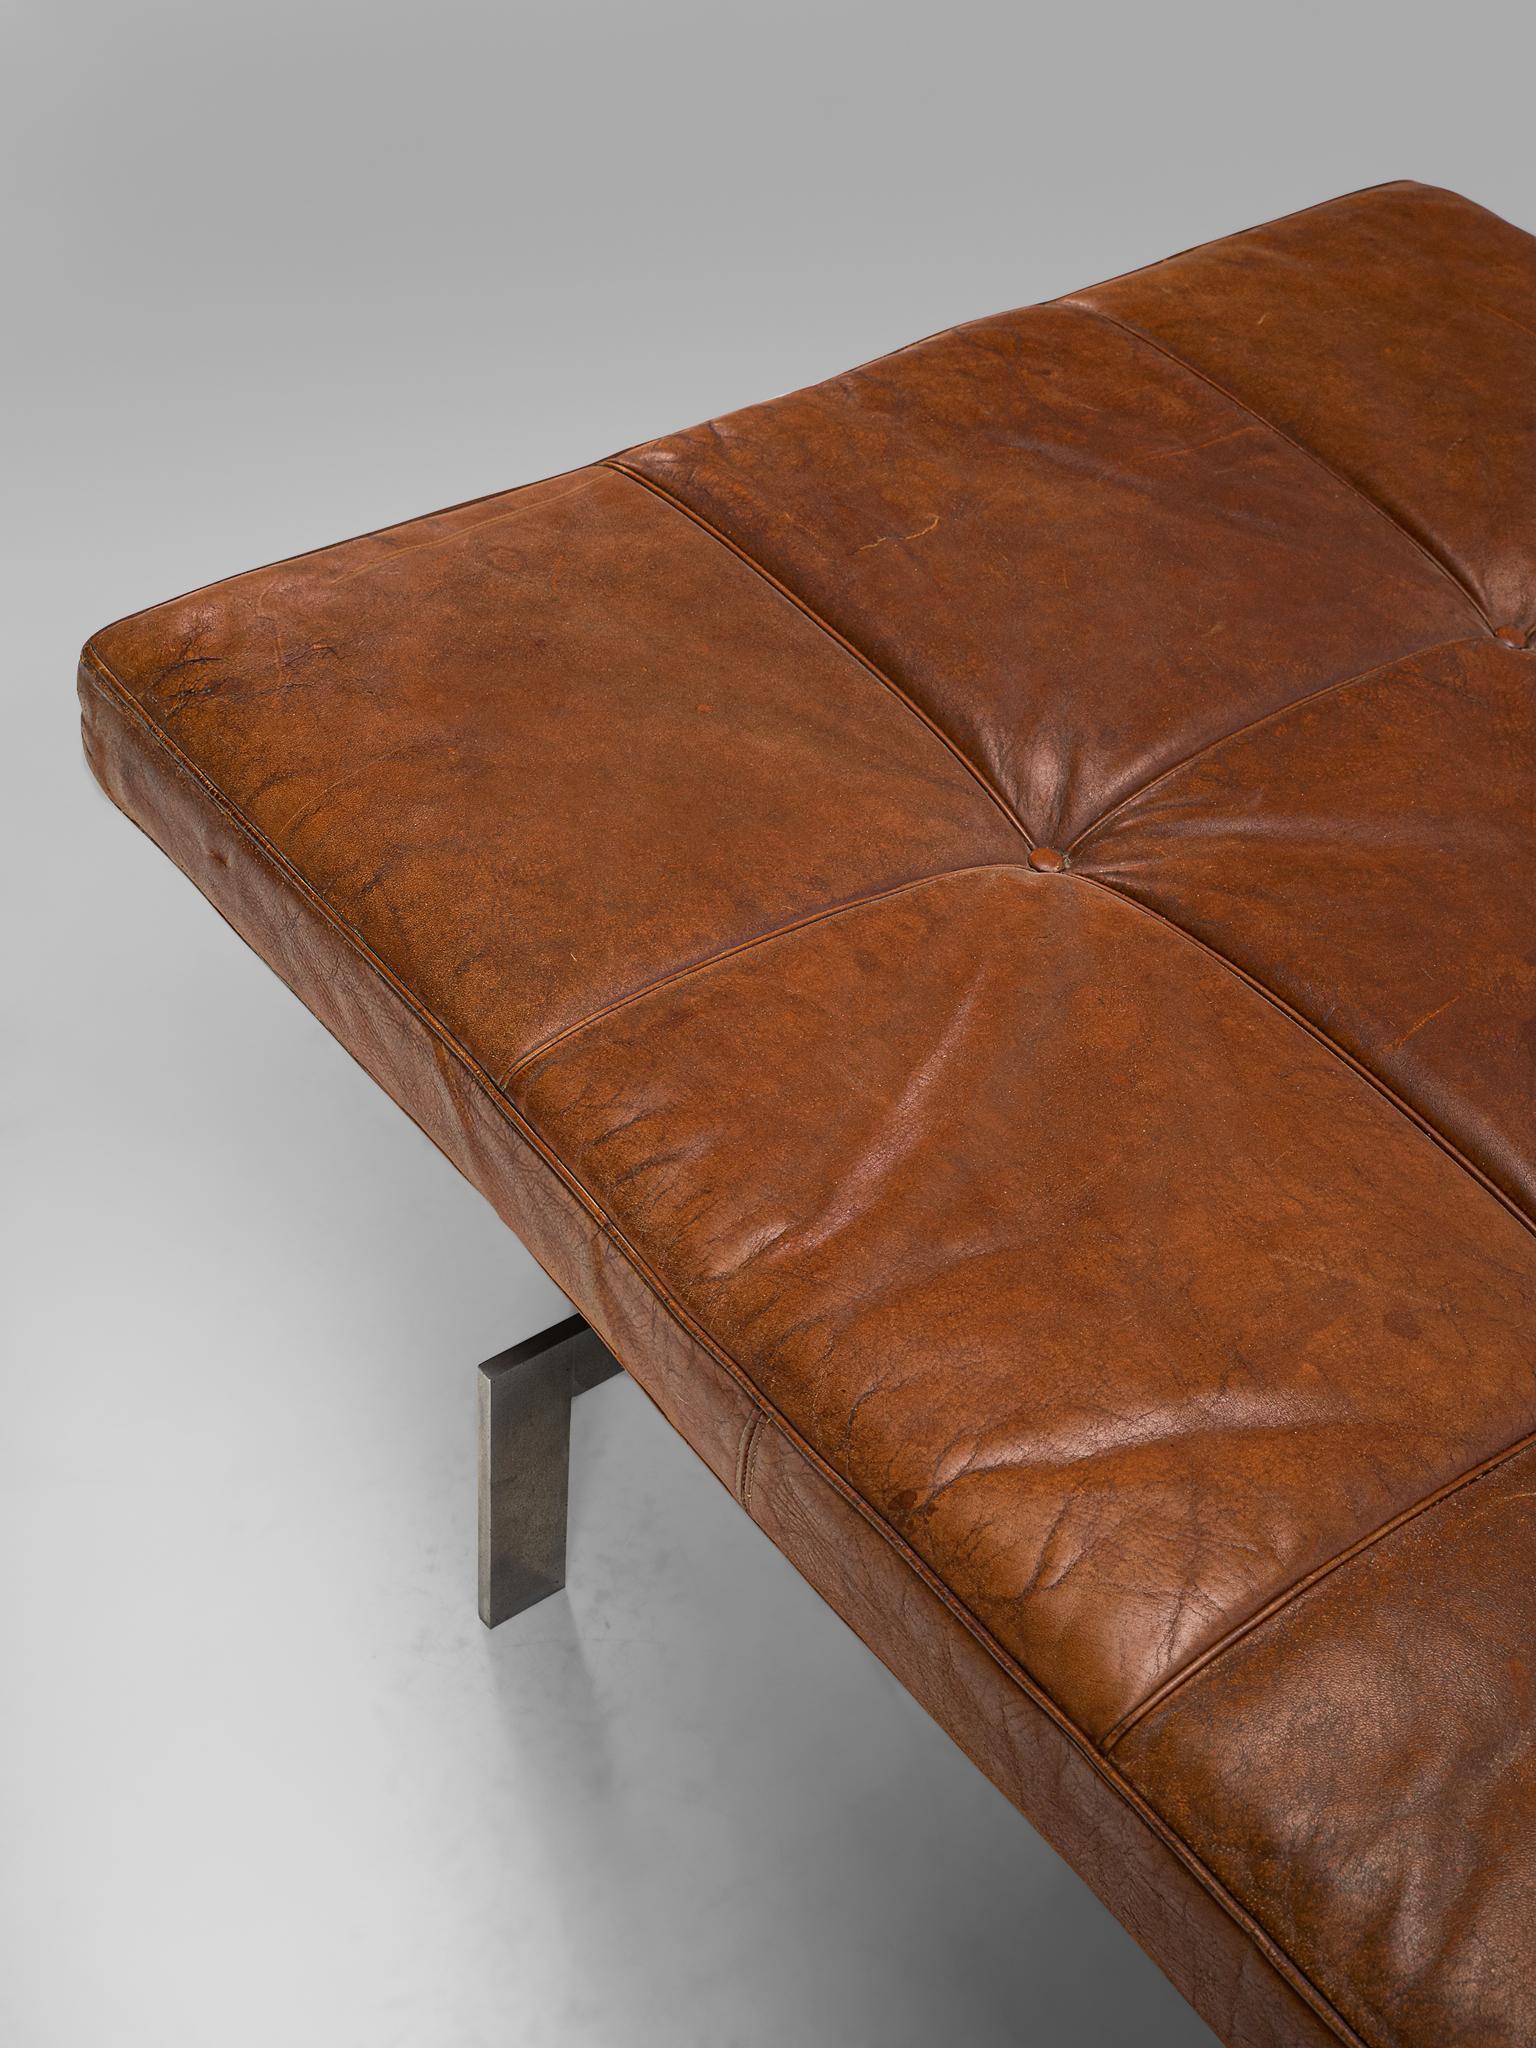 Mid-20th Century Poul Kjærholm Daybed Pk80 in Patinated Cognac Leather